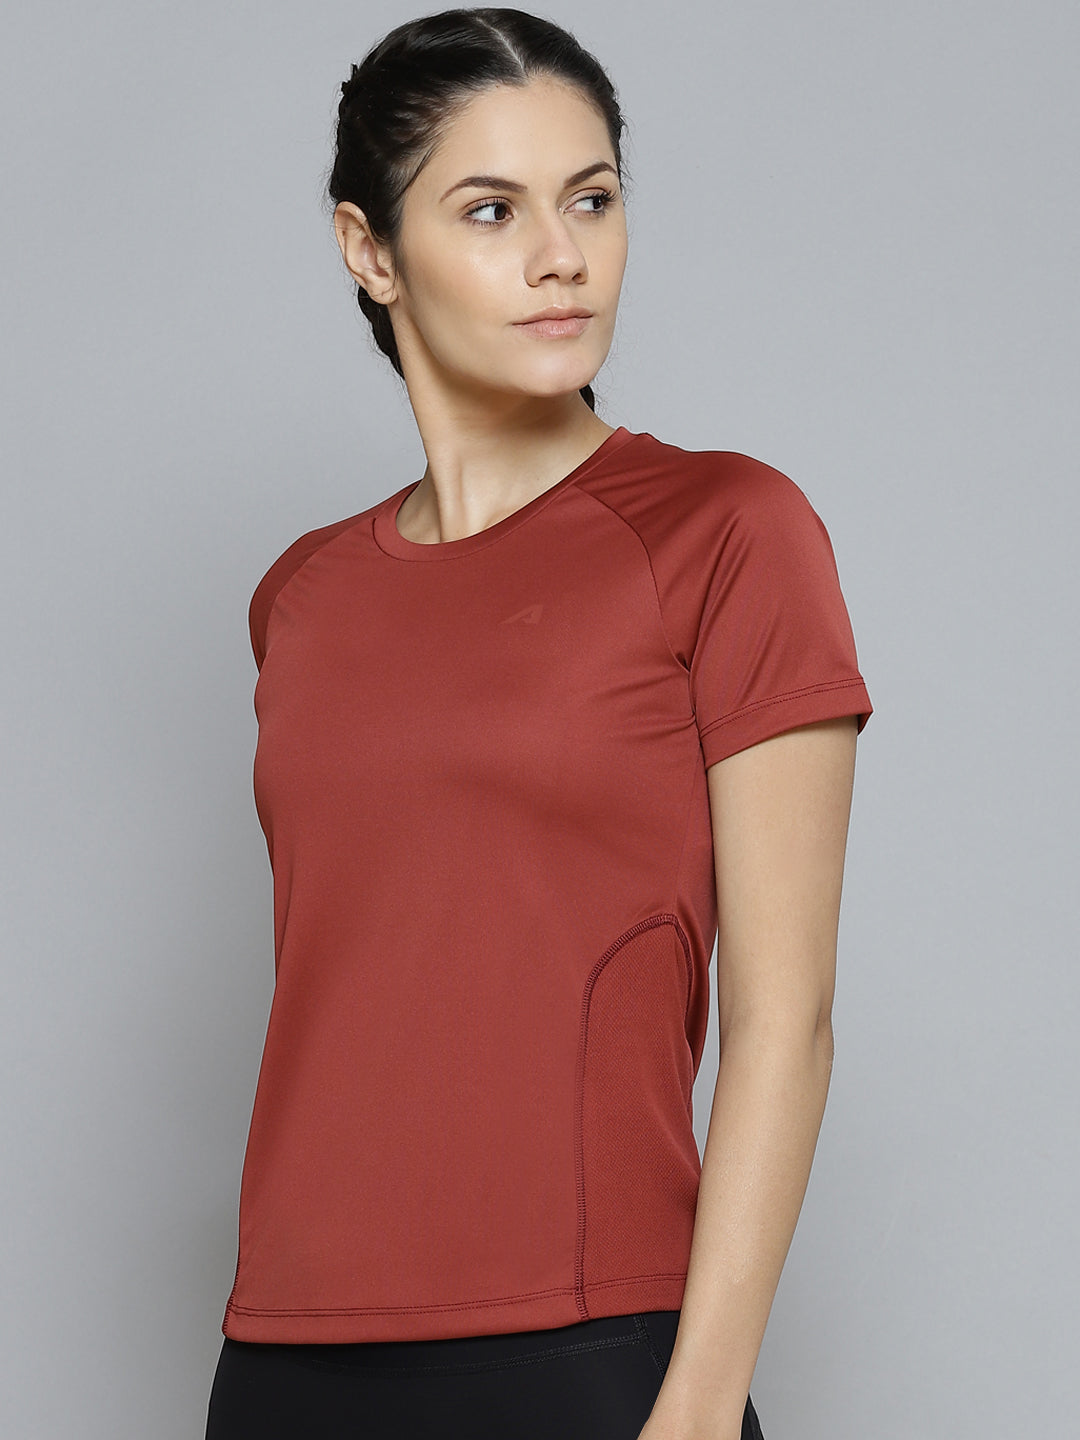 Alcis Women Rust Red Slim Fit Training or Gym T-shirt